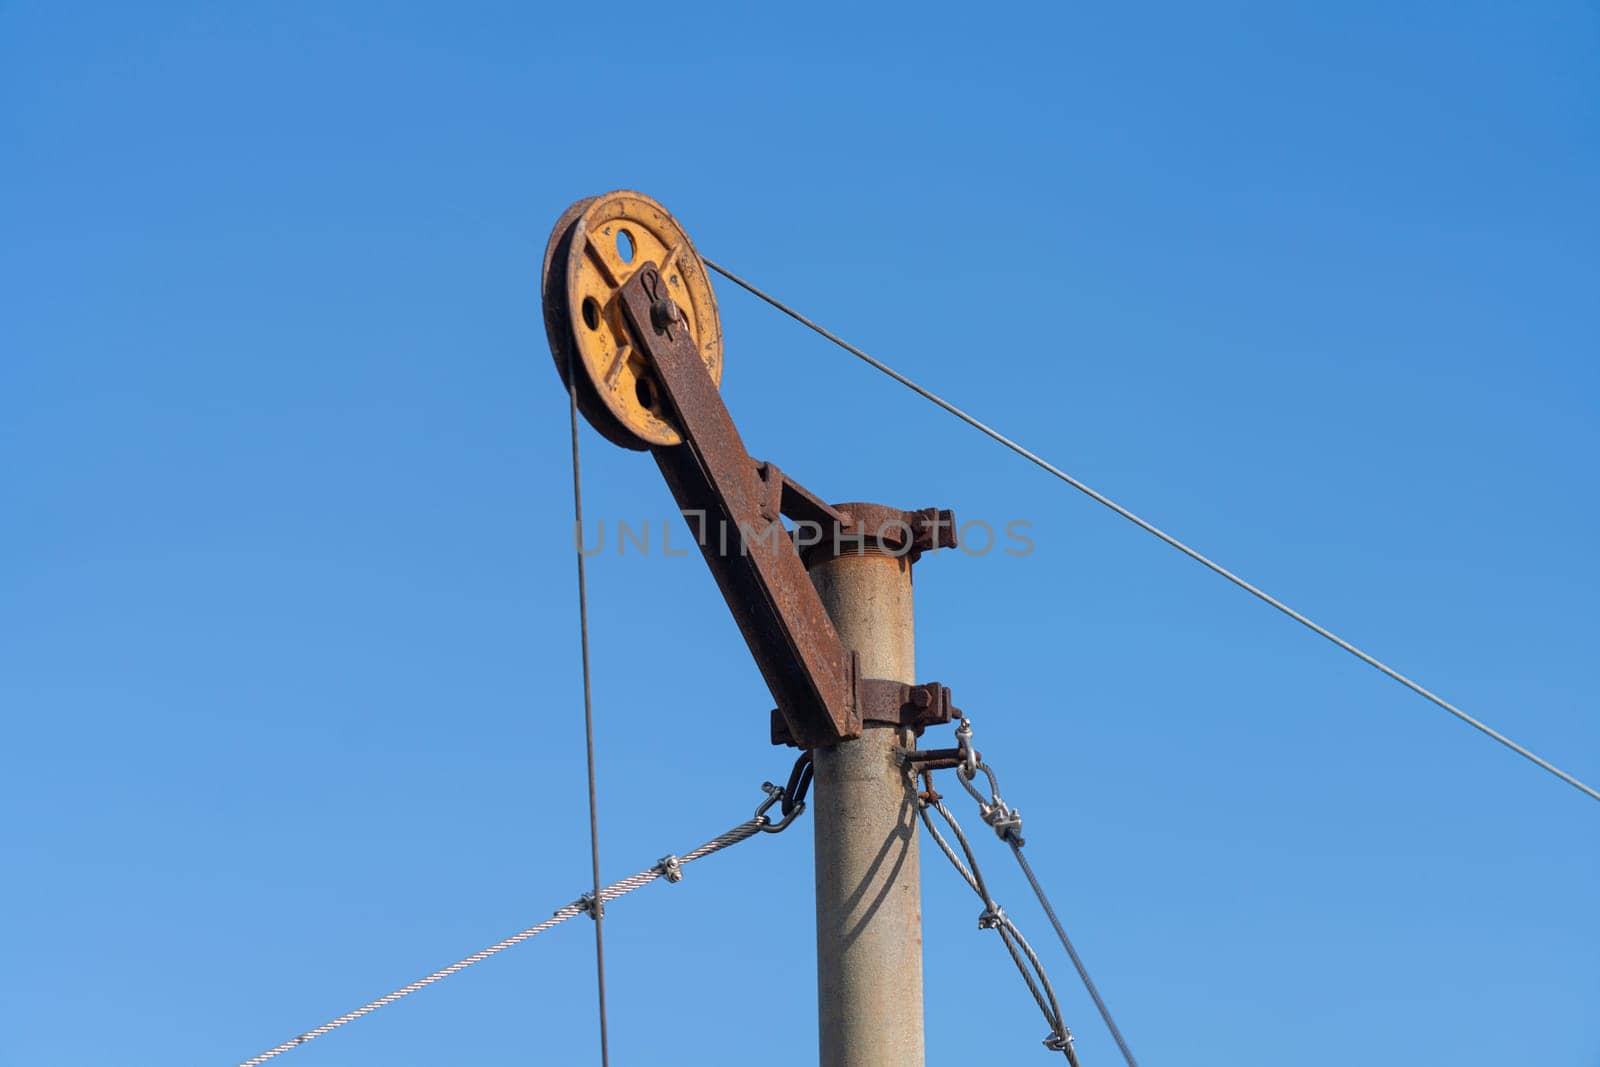 the pulleys on a pylon for lifting fishing nets